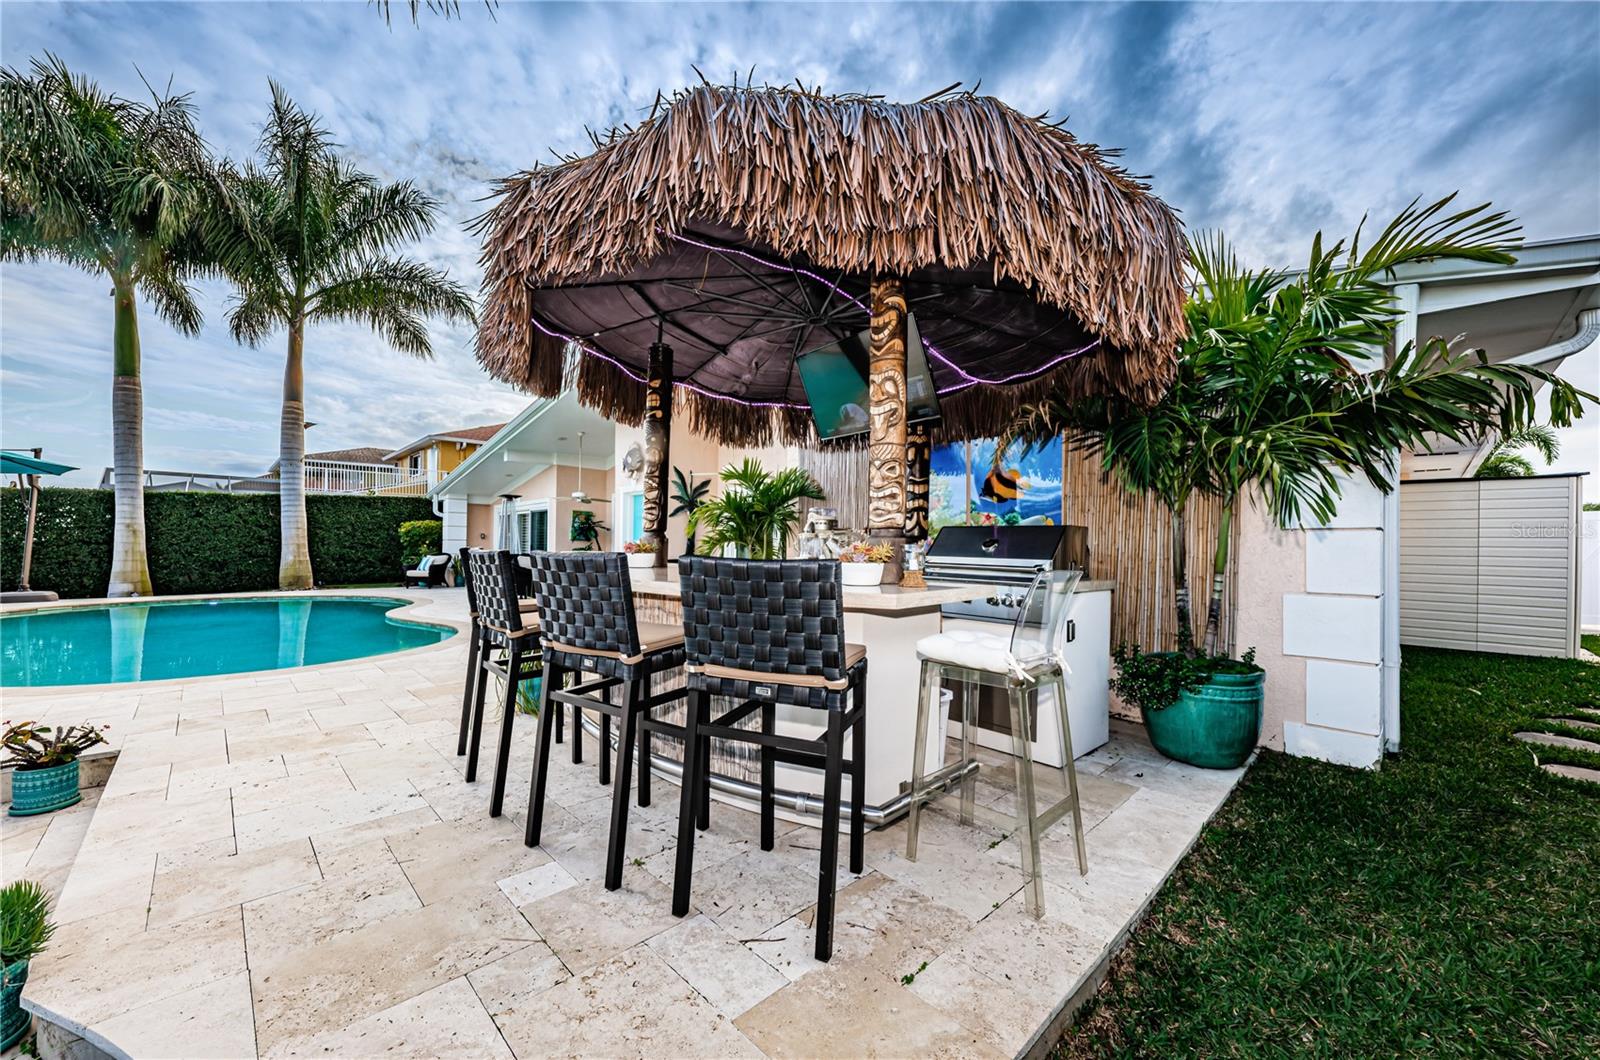 Your private Tiki hut ideal for entertaining.